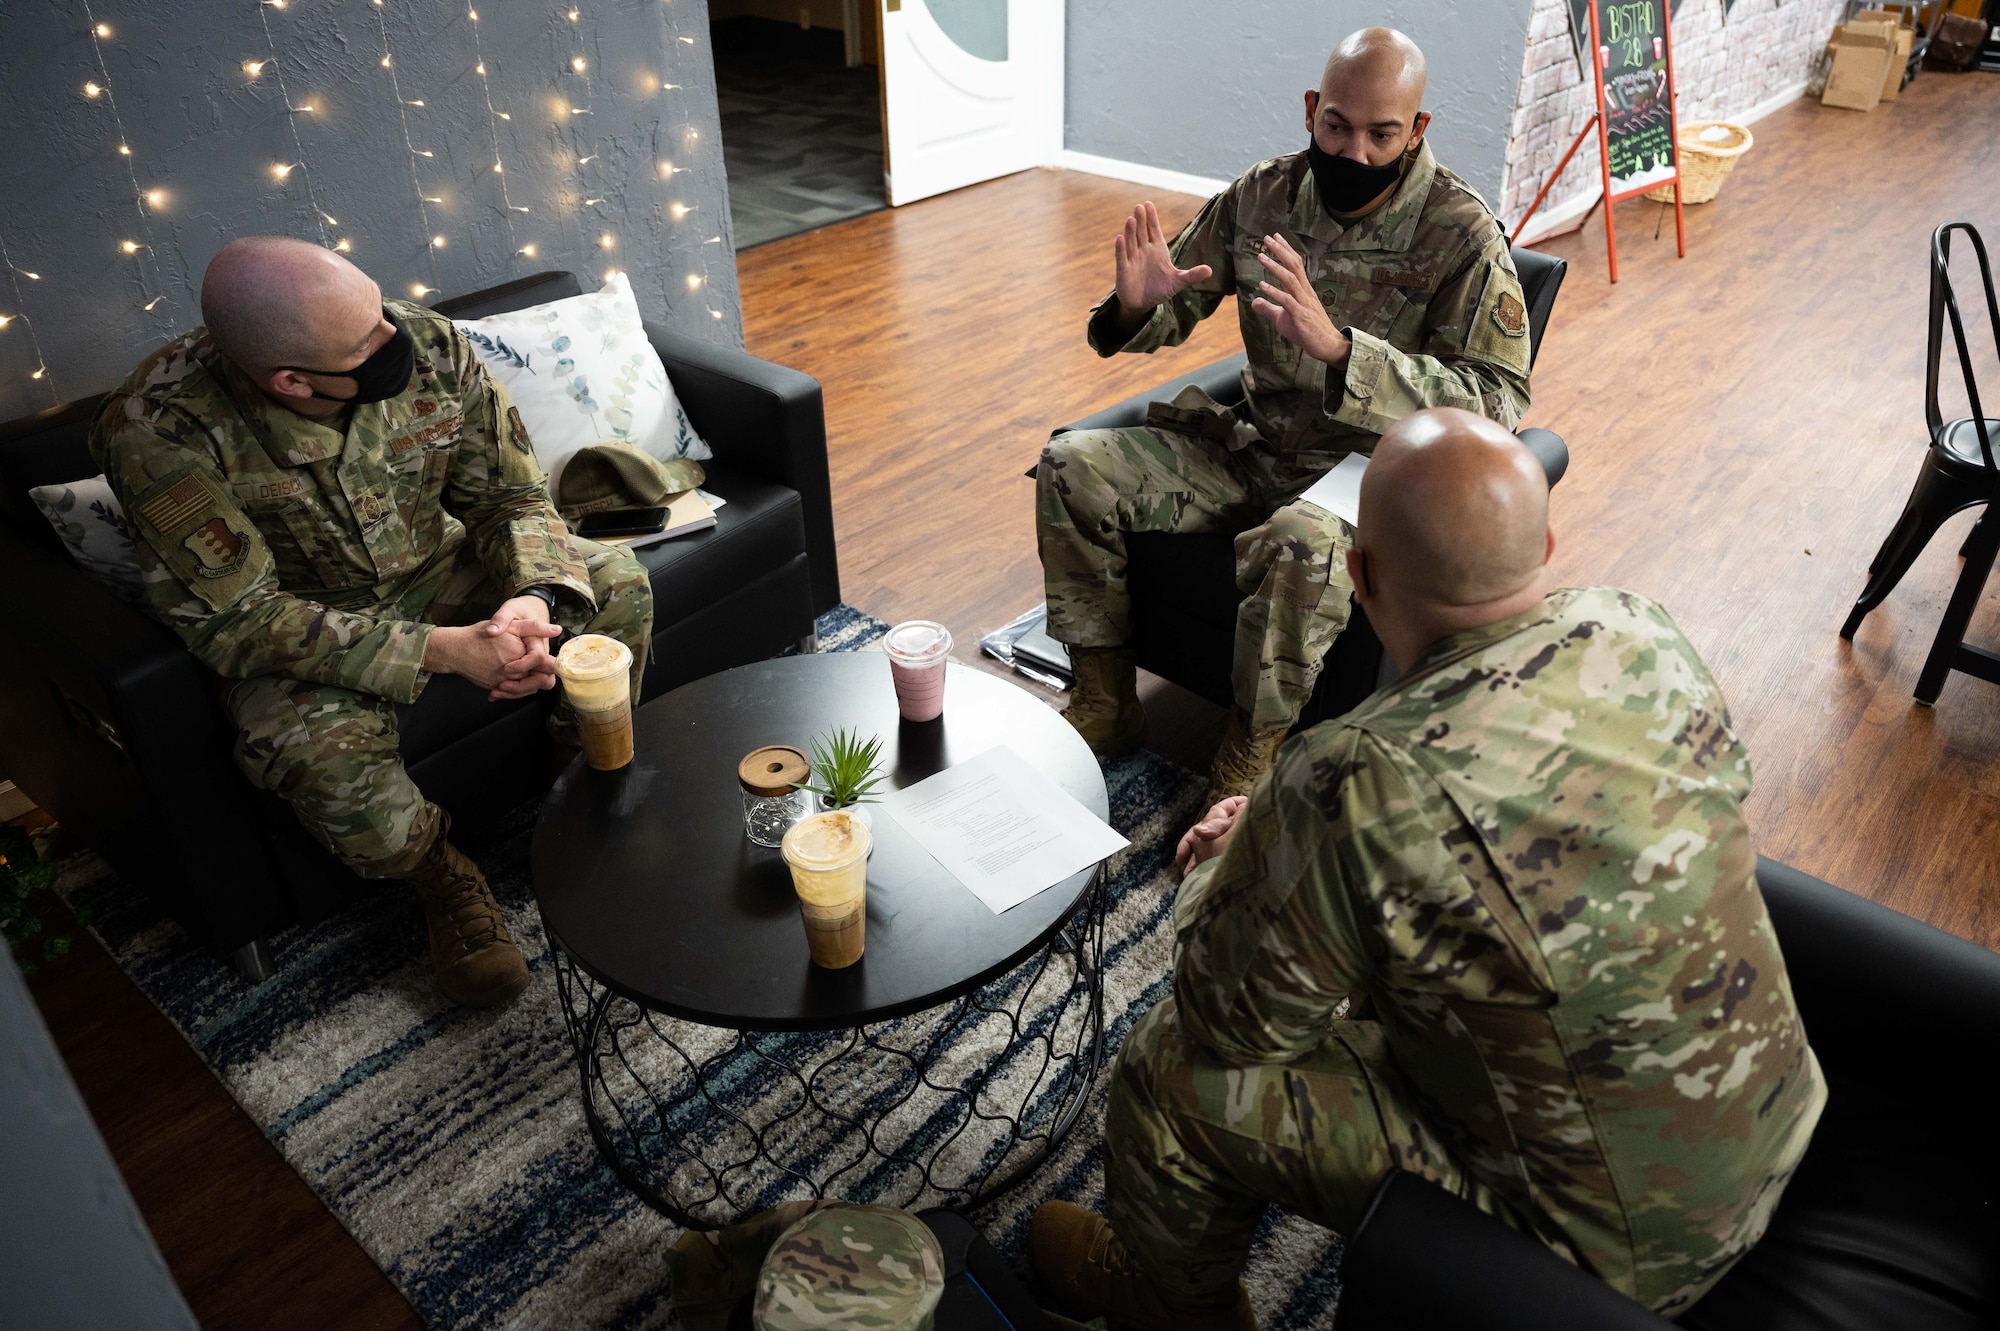 Chief Master Sgt. Steve Cenov, 8th Air Force command chief, (far right) sits with Chief Master Sgt. Justin Deisch, 28th Bomb Wing command chief, (left) and Master Sgt. Eric Clayborn, 28th Bomb Wing diversity and inclusion program manager, (middle) discussing the Diversity and Inclusion efforts at Ellsworth Air Force Base, S.D., Oct. 26, 2021. Ellsworth is the first base in Air Force Global Strike Command stand up a D&I office and begin creating positive change throughout the installation. (U.S. Air Force photo by Senior Airman Alexi Bosarge)